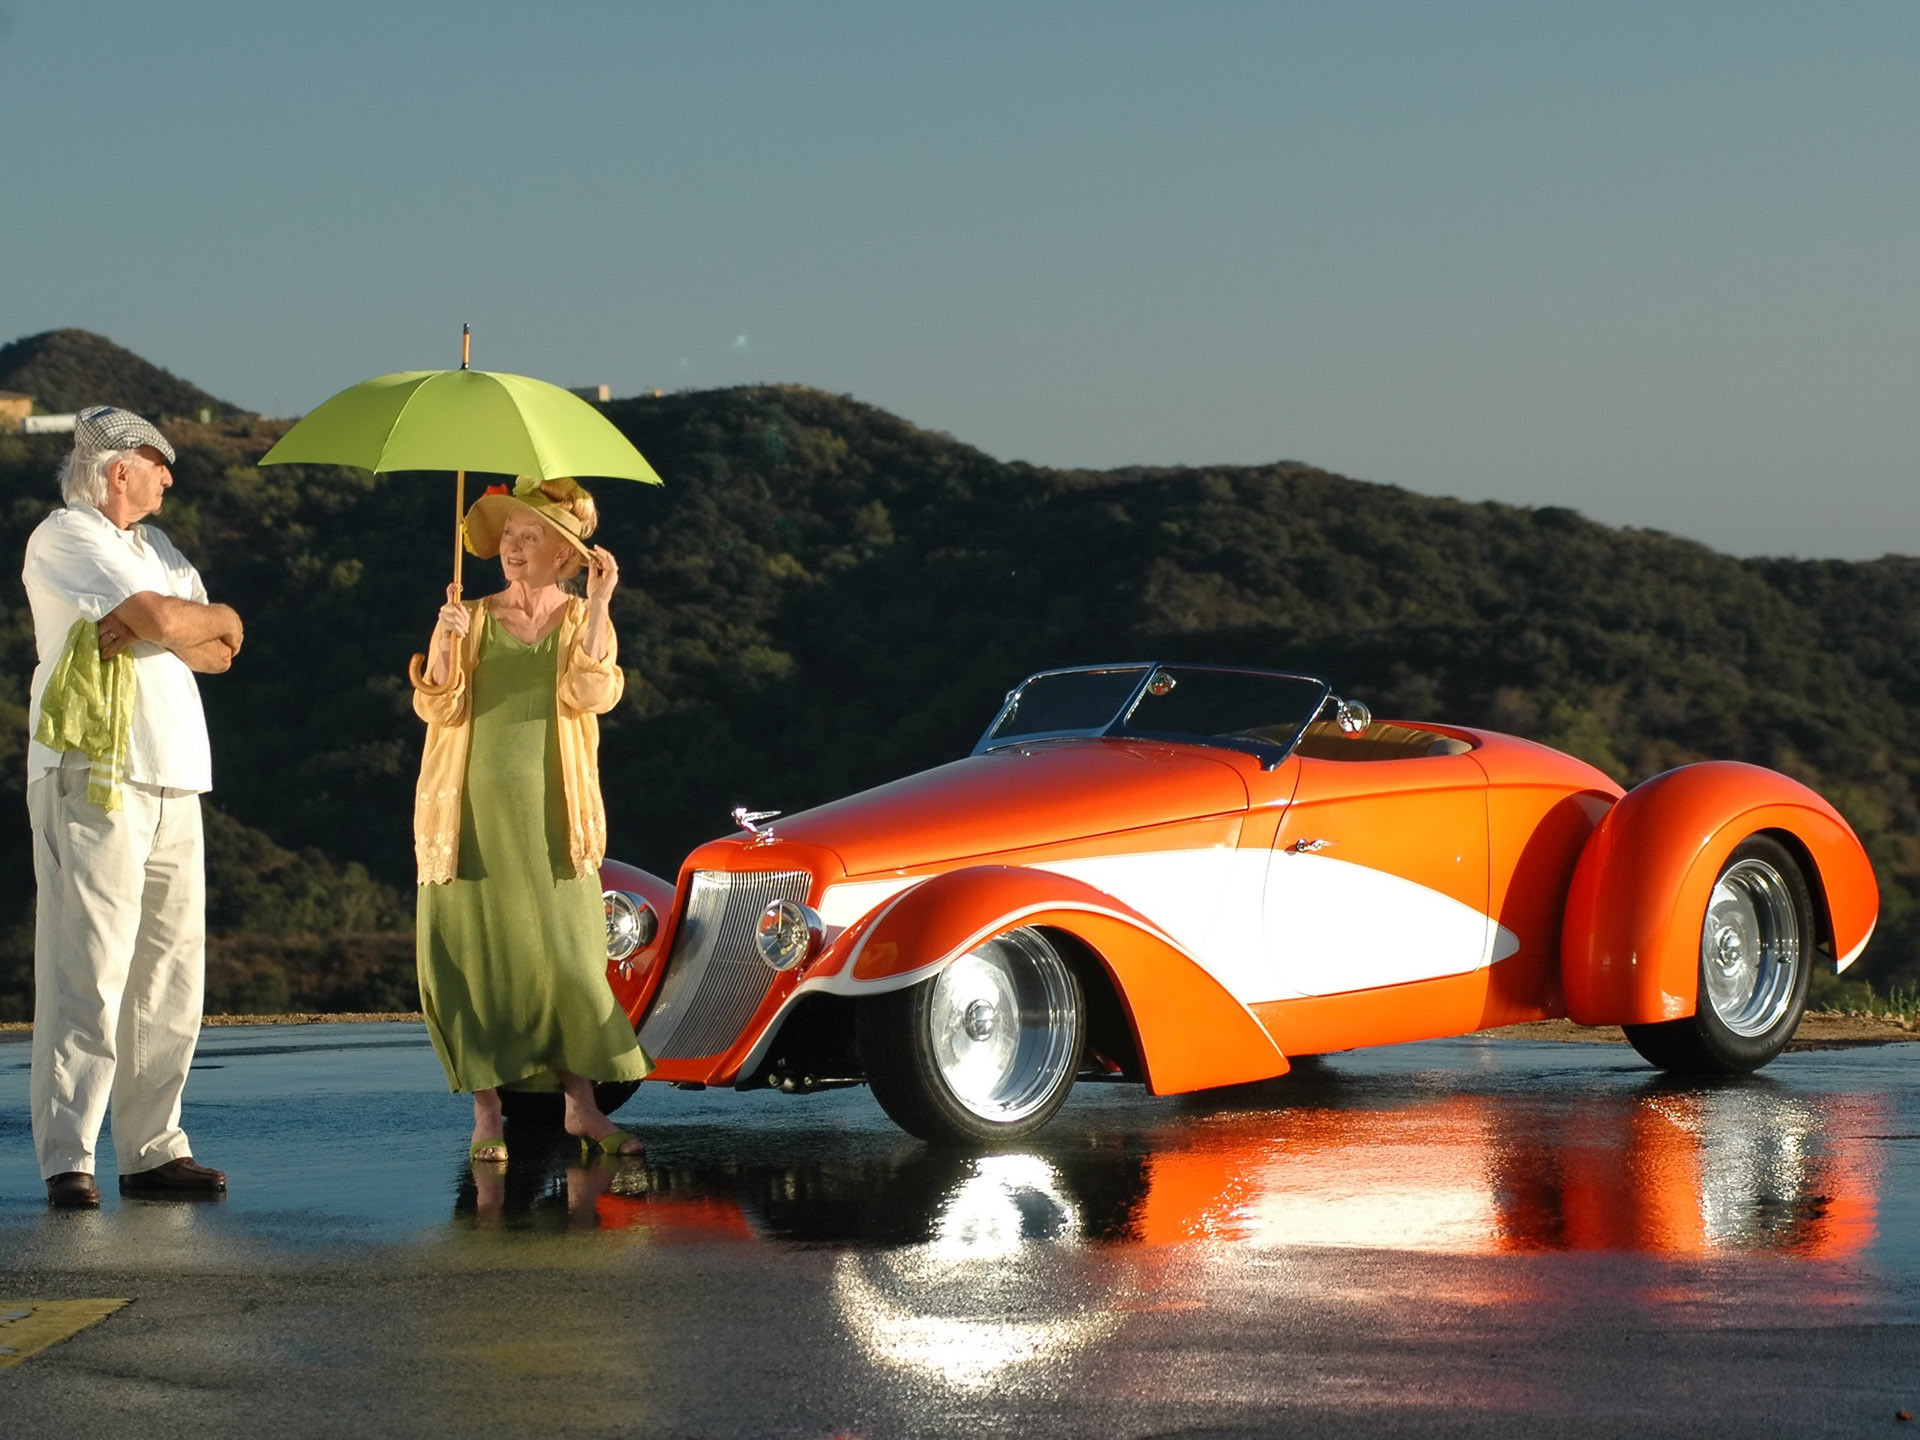 1920x1440 Deco Rides Boattail Speedster by Chip Foose - Man & Woman with Umbrella -   Wallpaper